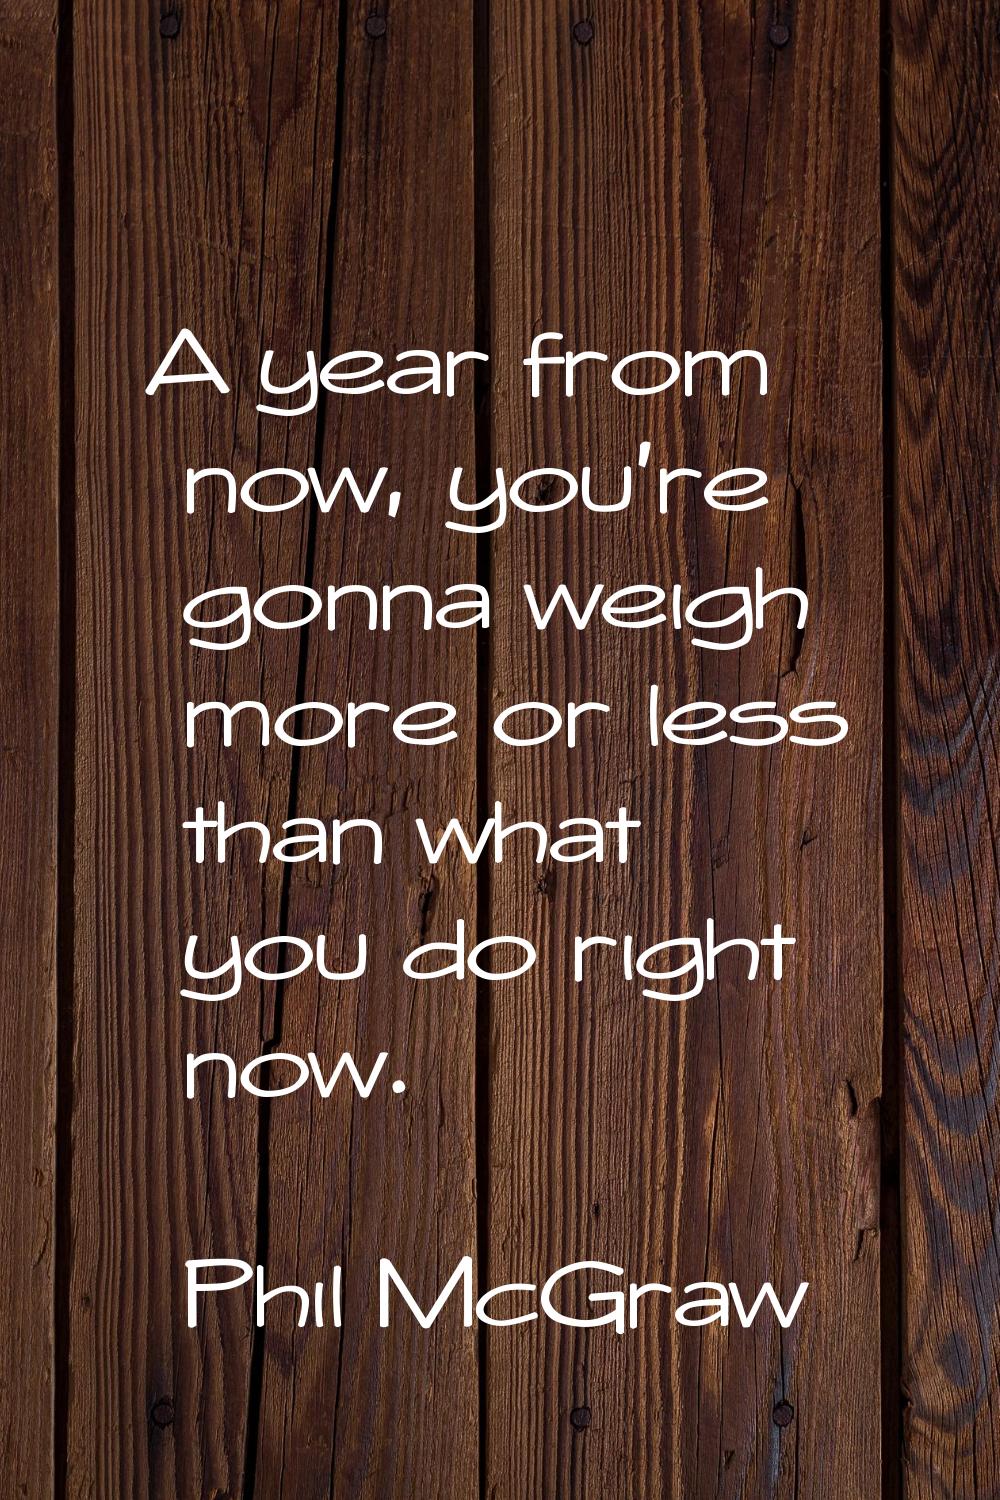 A year from now, you're gonna weigh more or less than what you do right now.